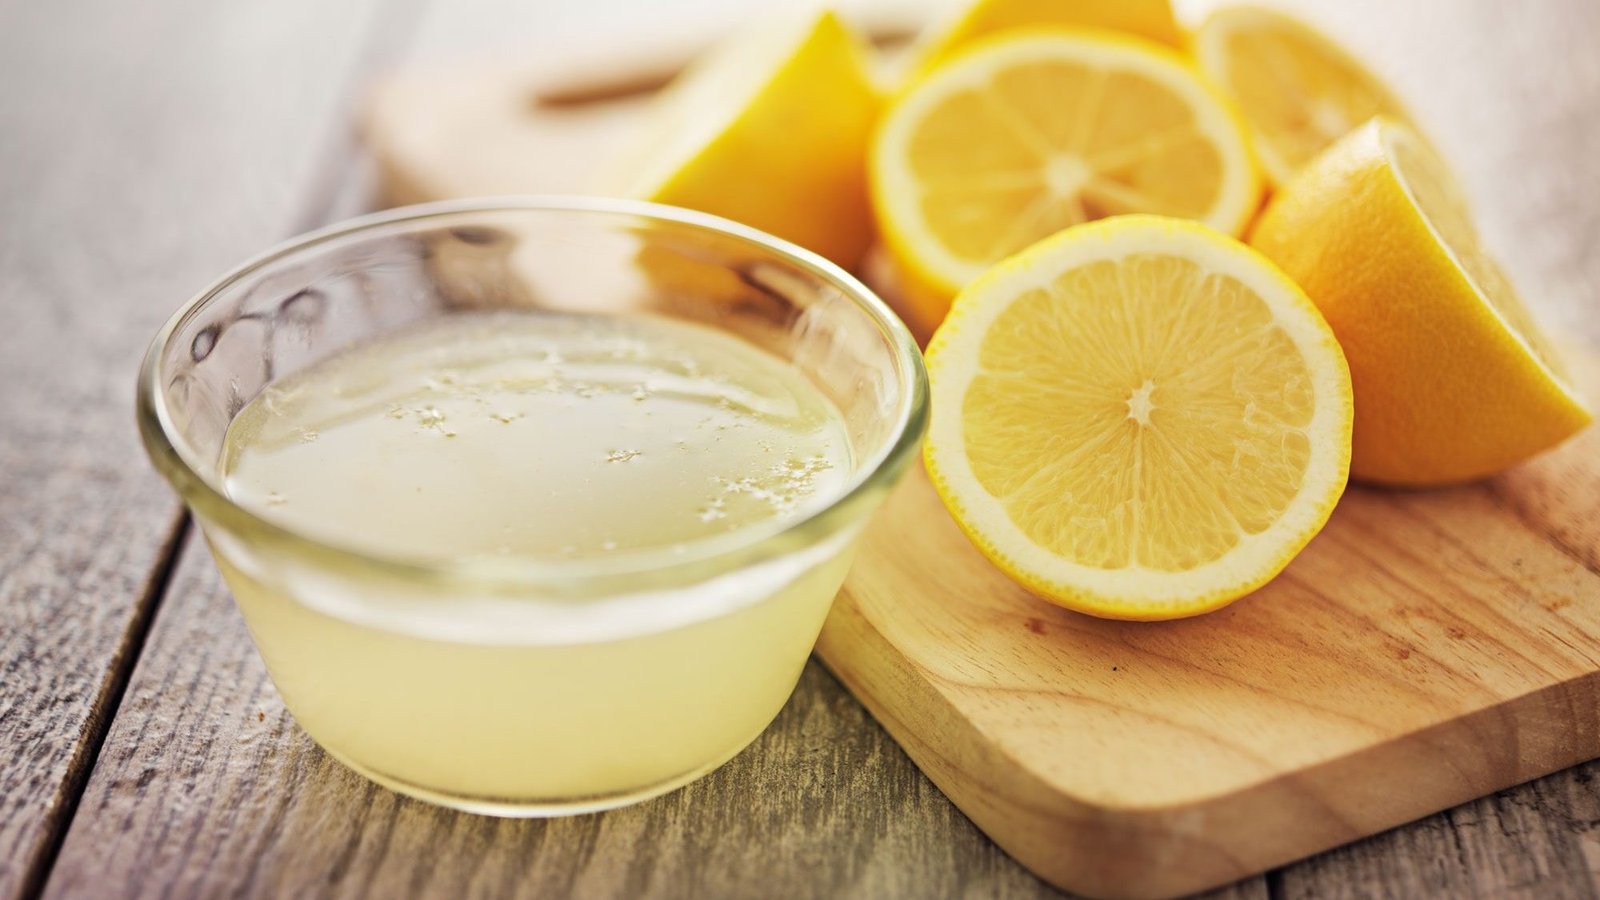 How to Eliminate Fleas on Cats with Natural Home Remedies: Lemon Juice